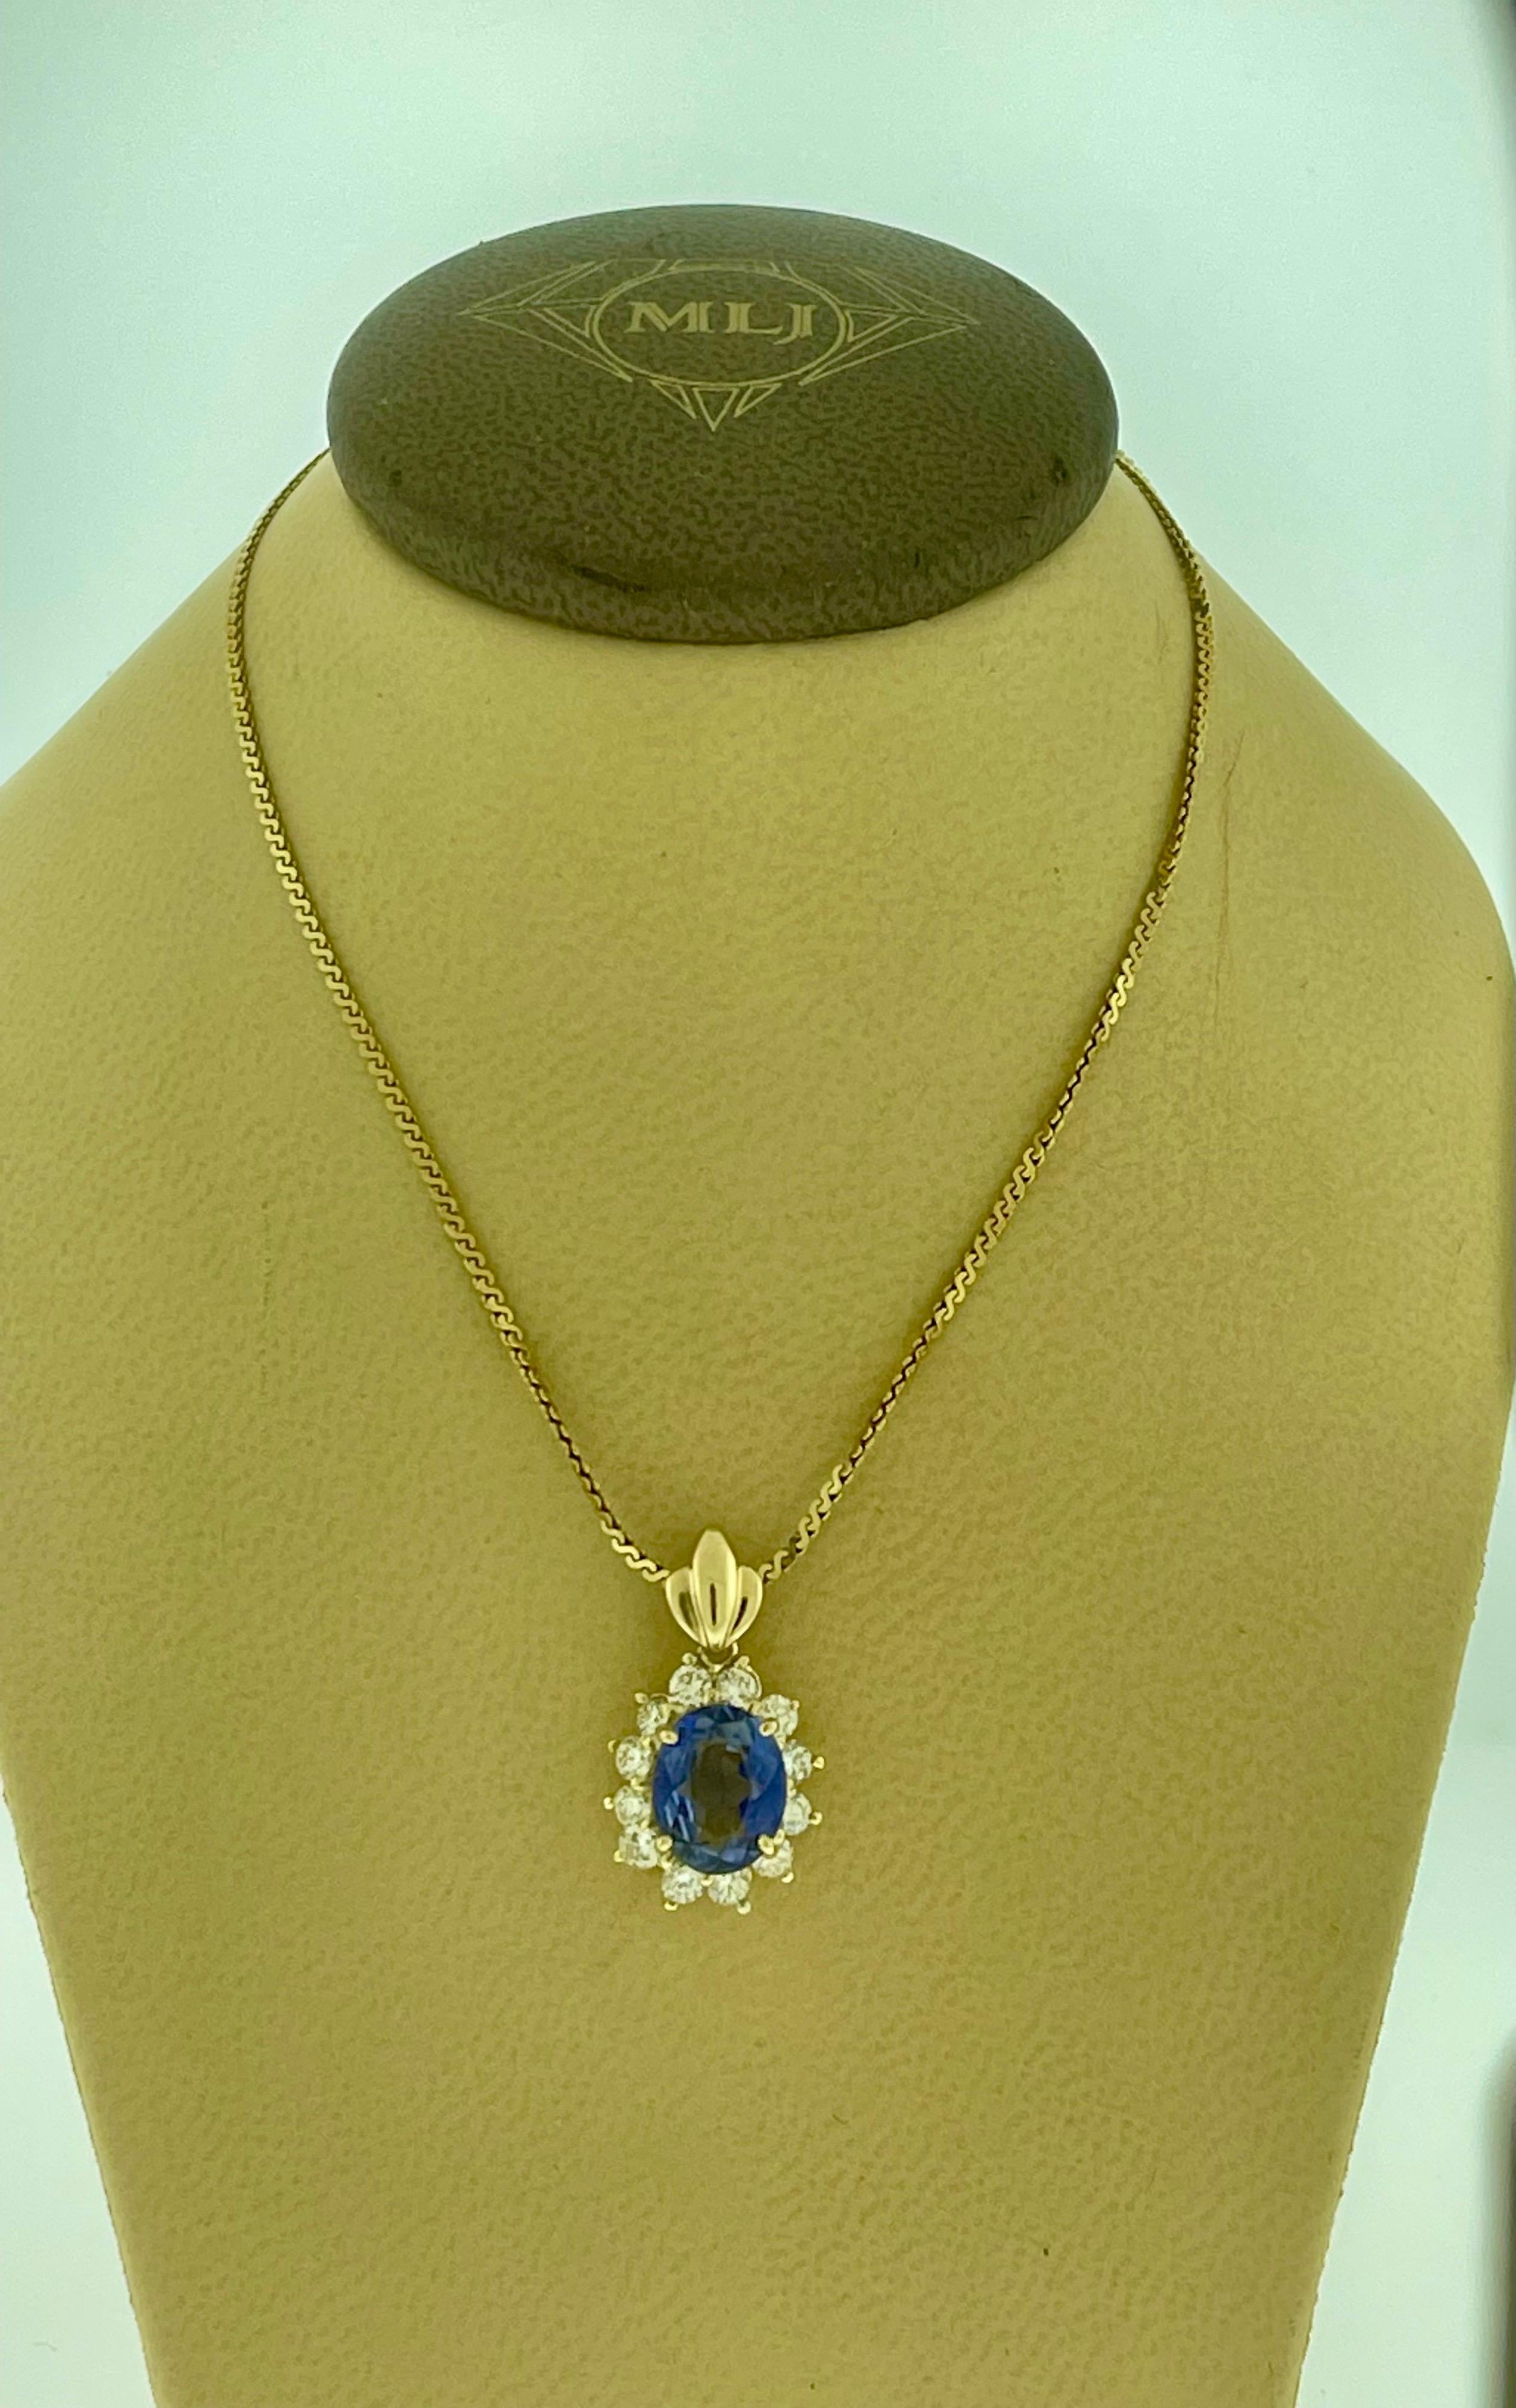 3 Carat Tanzanite and 1 Ct Diamond Pendant or Necklace 14 Karat Yellow Gold For Sale 5